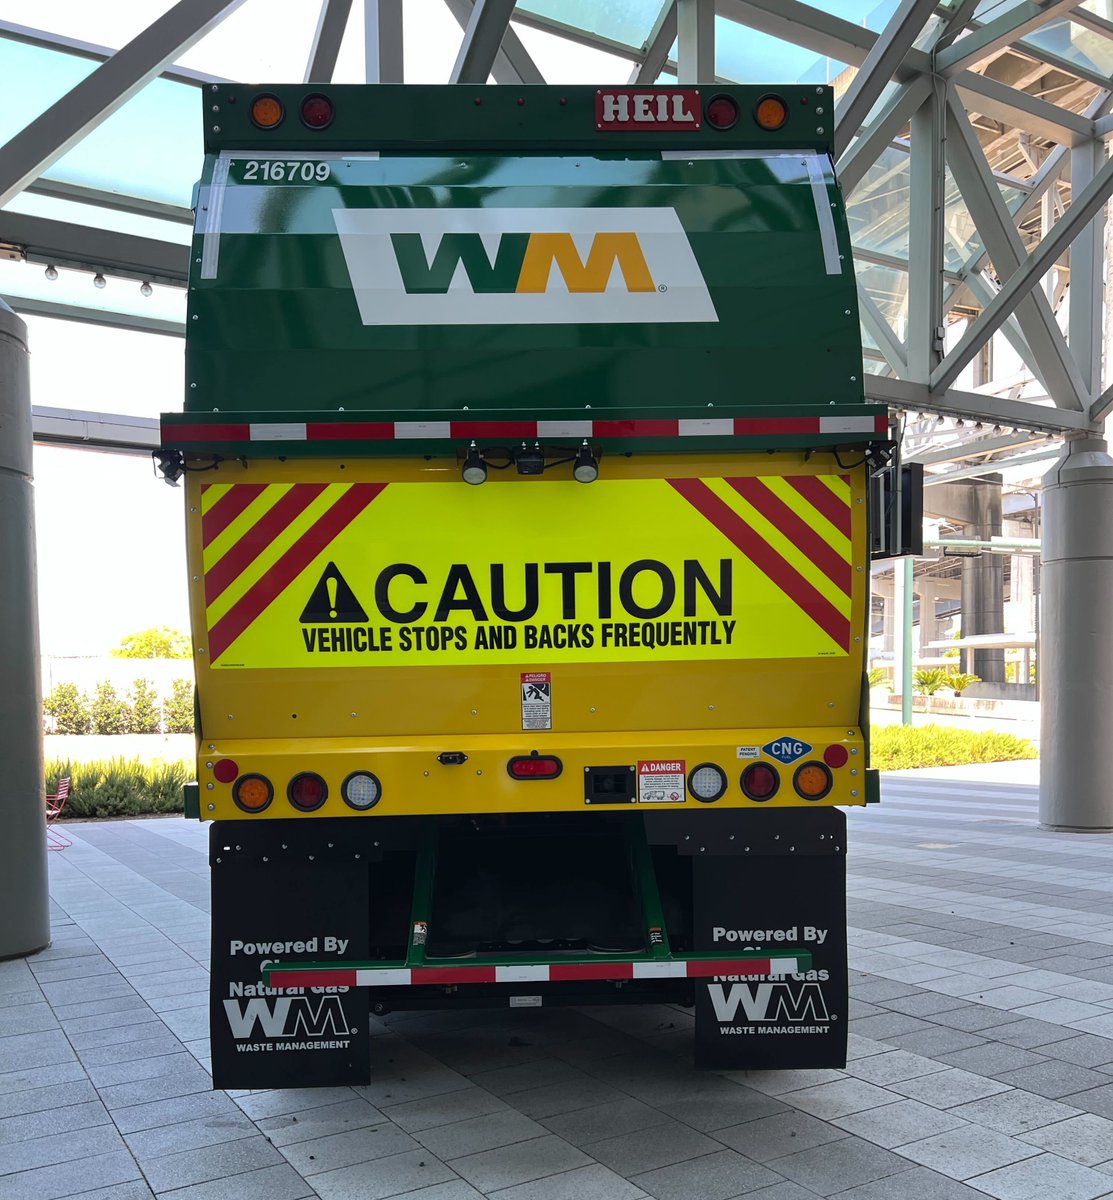 Last week, Spartan launched Hoplo at @Waste_Expo!  
Hoplo is an advanced collision warning solution with the most robust situational awareness for drivers on the market today. 

Visit spartanhoplo.com to setup an onsite demo.

@wasterecycling